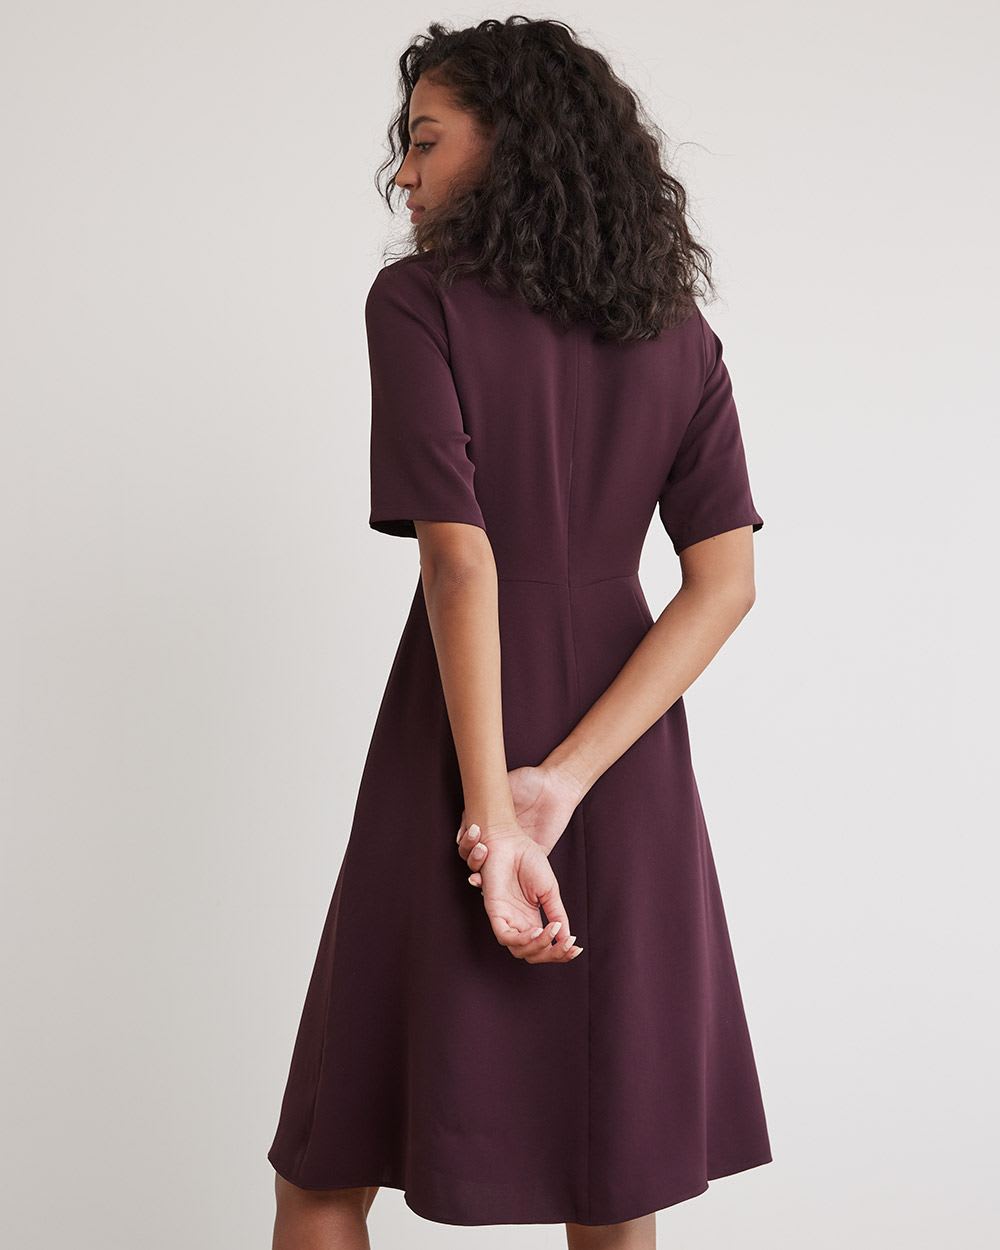 Fit and Flare Midi Dress in Burgundy, Boat Neck Swing Dress With Pockets,  Short Sleeve Party Dress, Mother of the Bride Dress 2336 